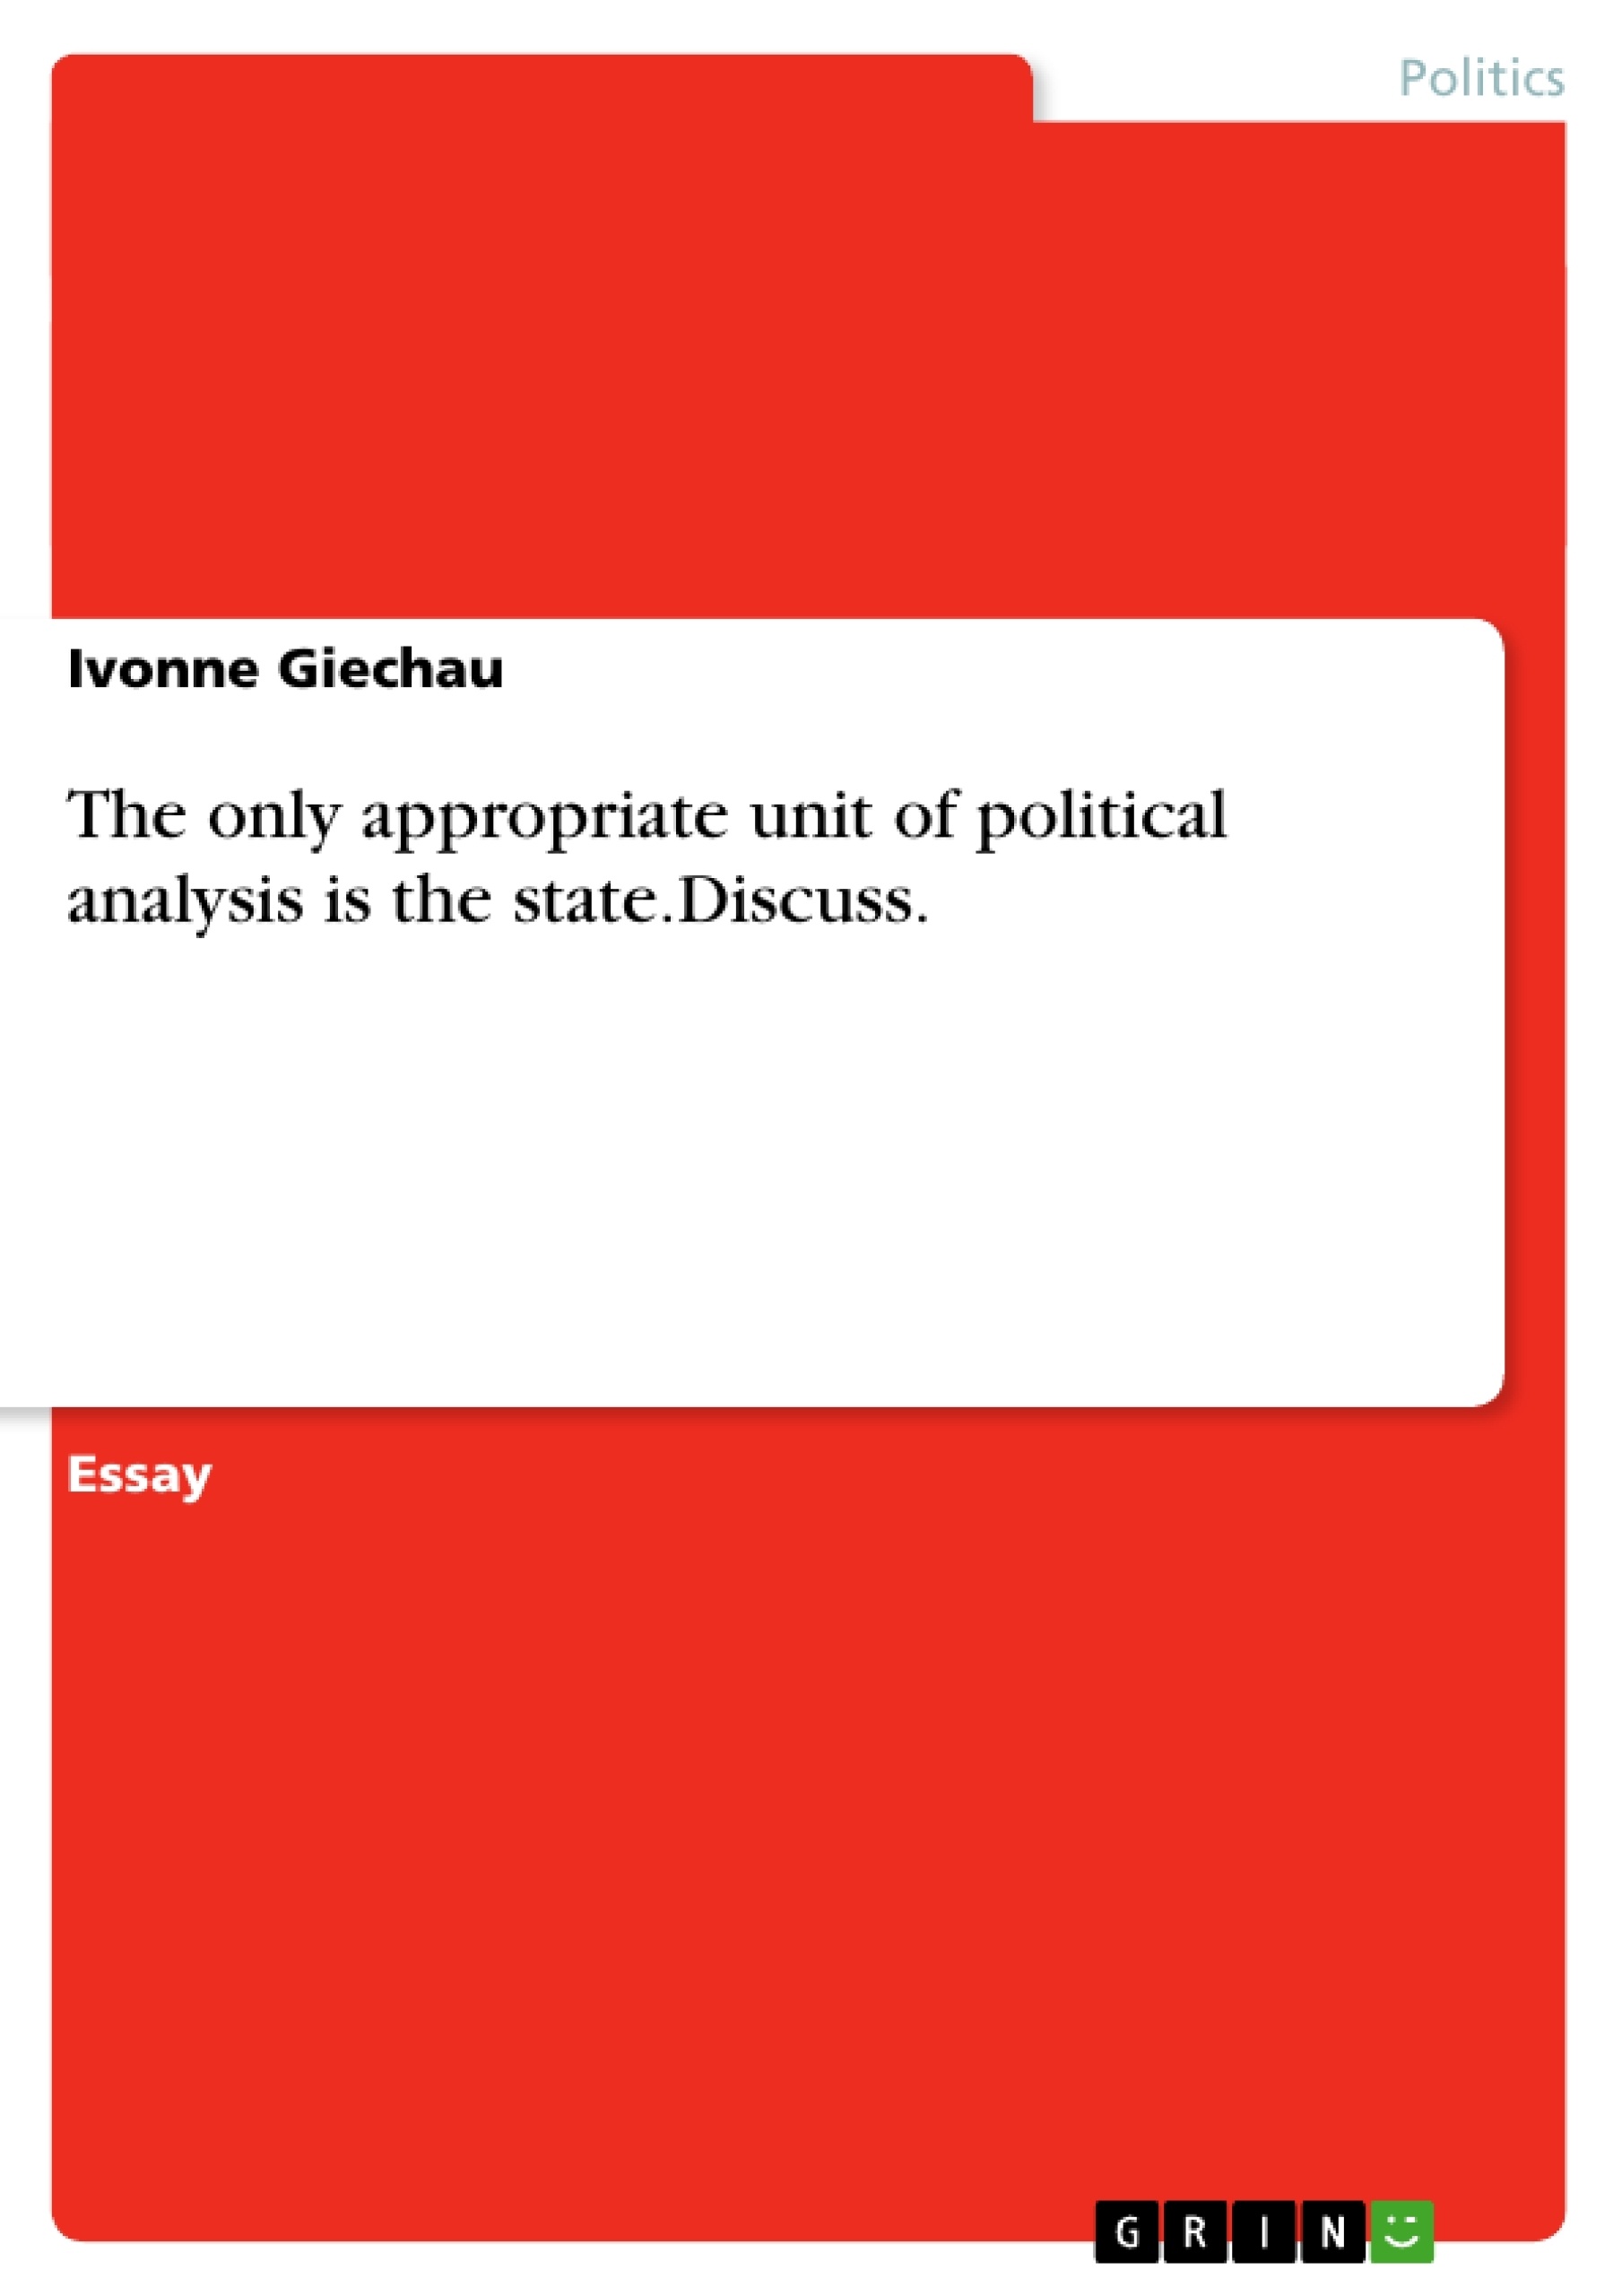 Title: The only appropriate unit of political analysis is the state.Discuss.